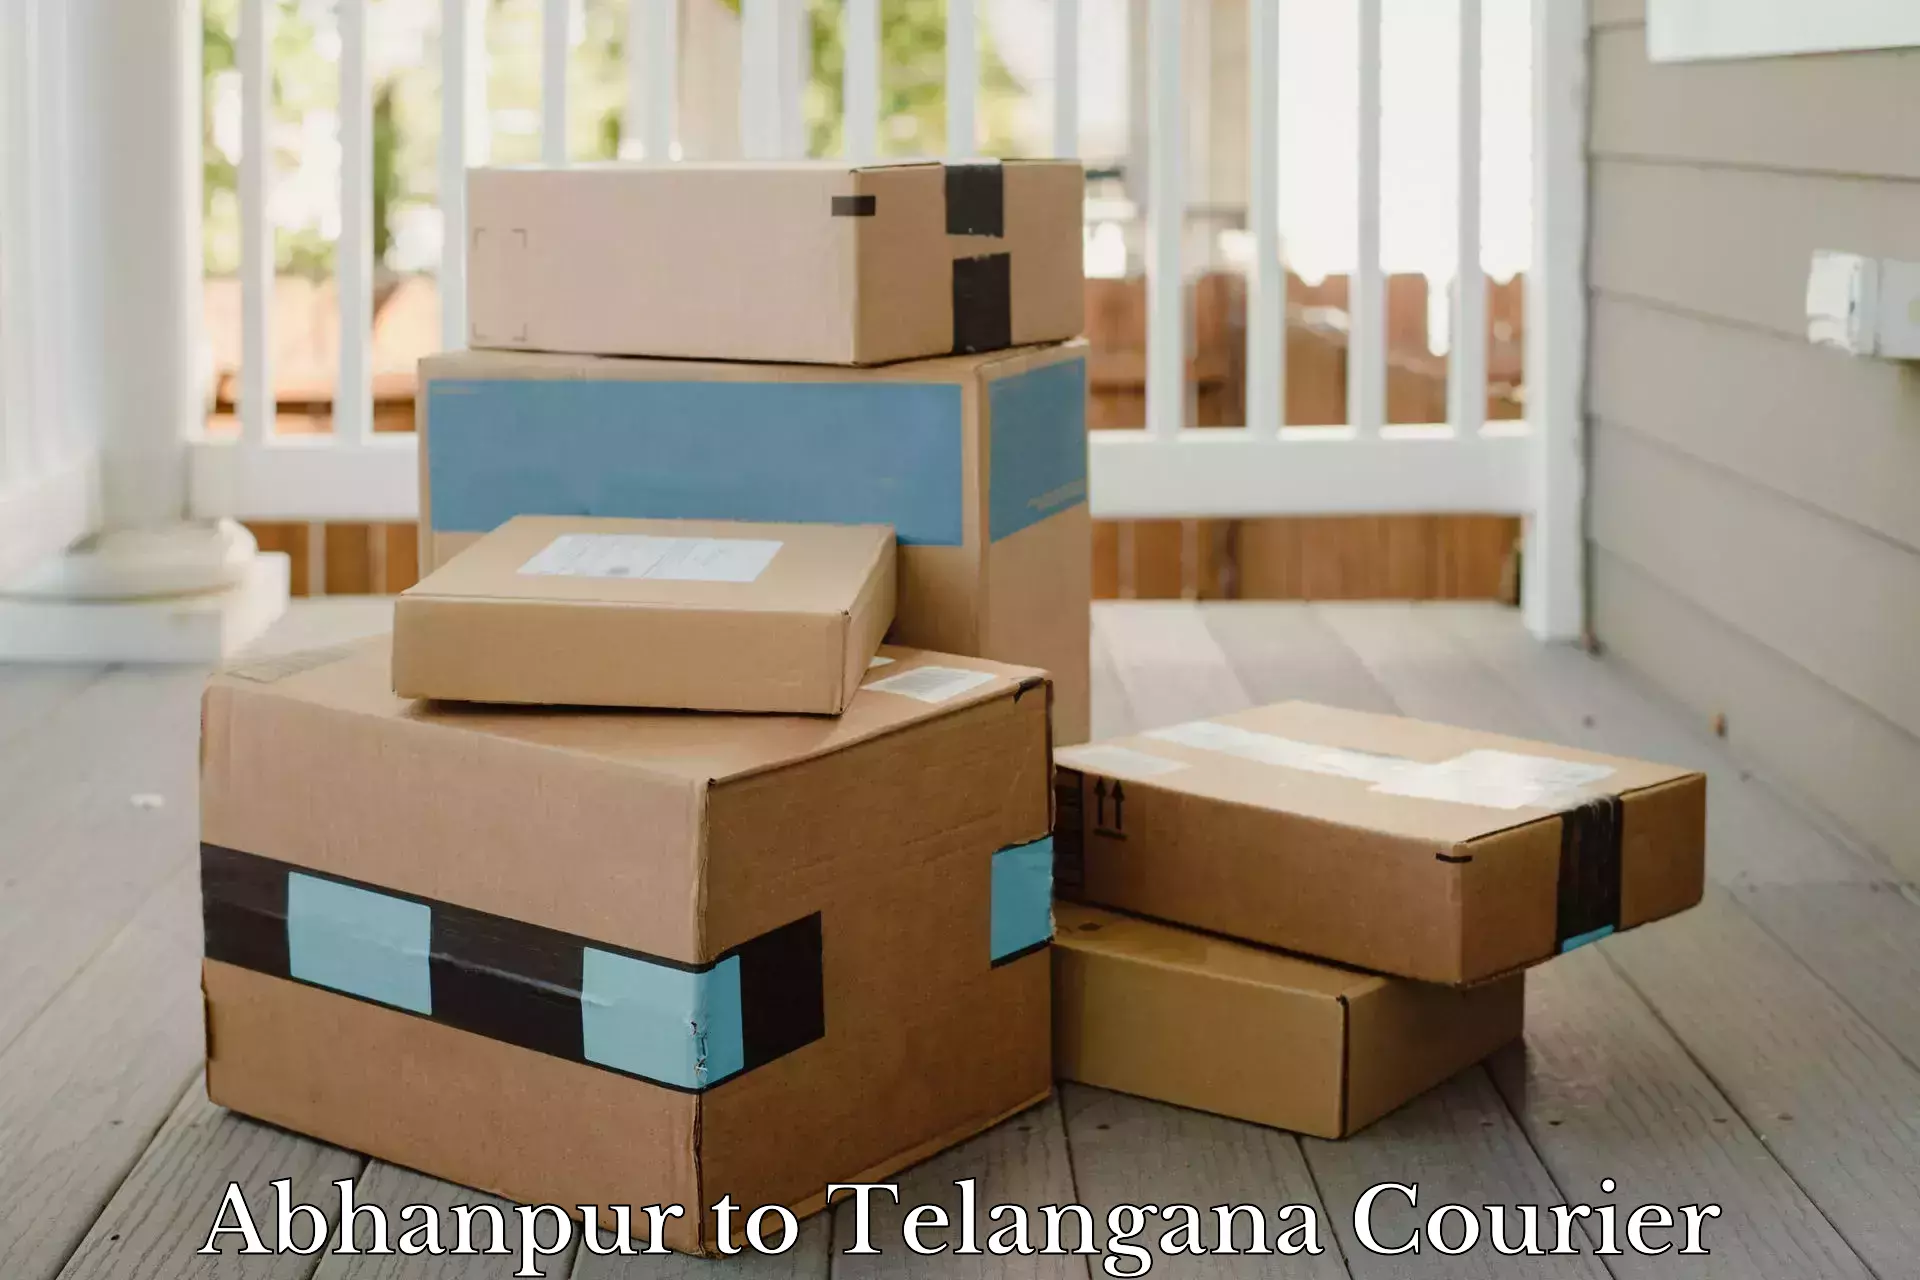 Flexible delivery schedules Abhanpur to Dharmapuri Jagtial